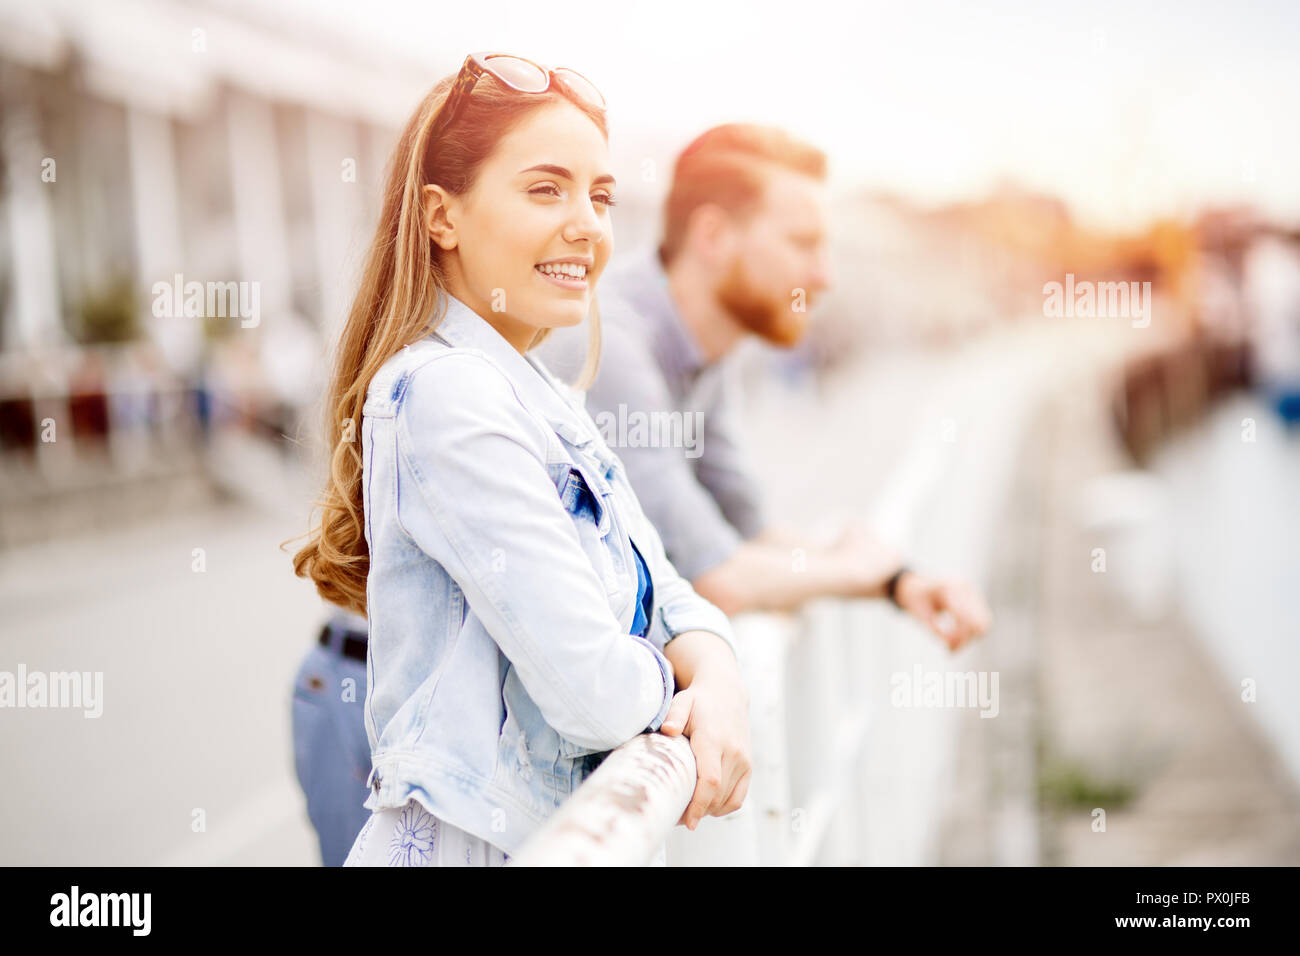 Beautiful woman waiting for his approach Stock Photo